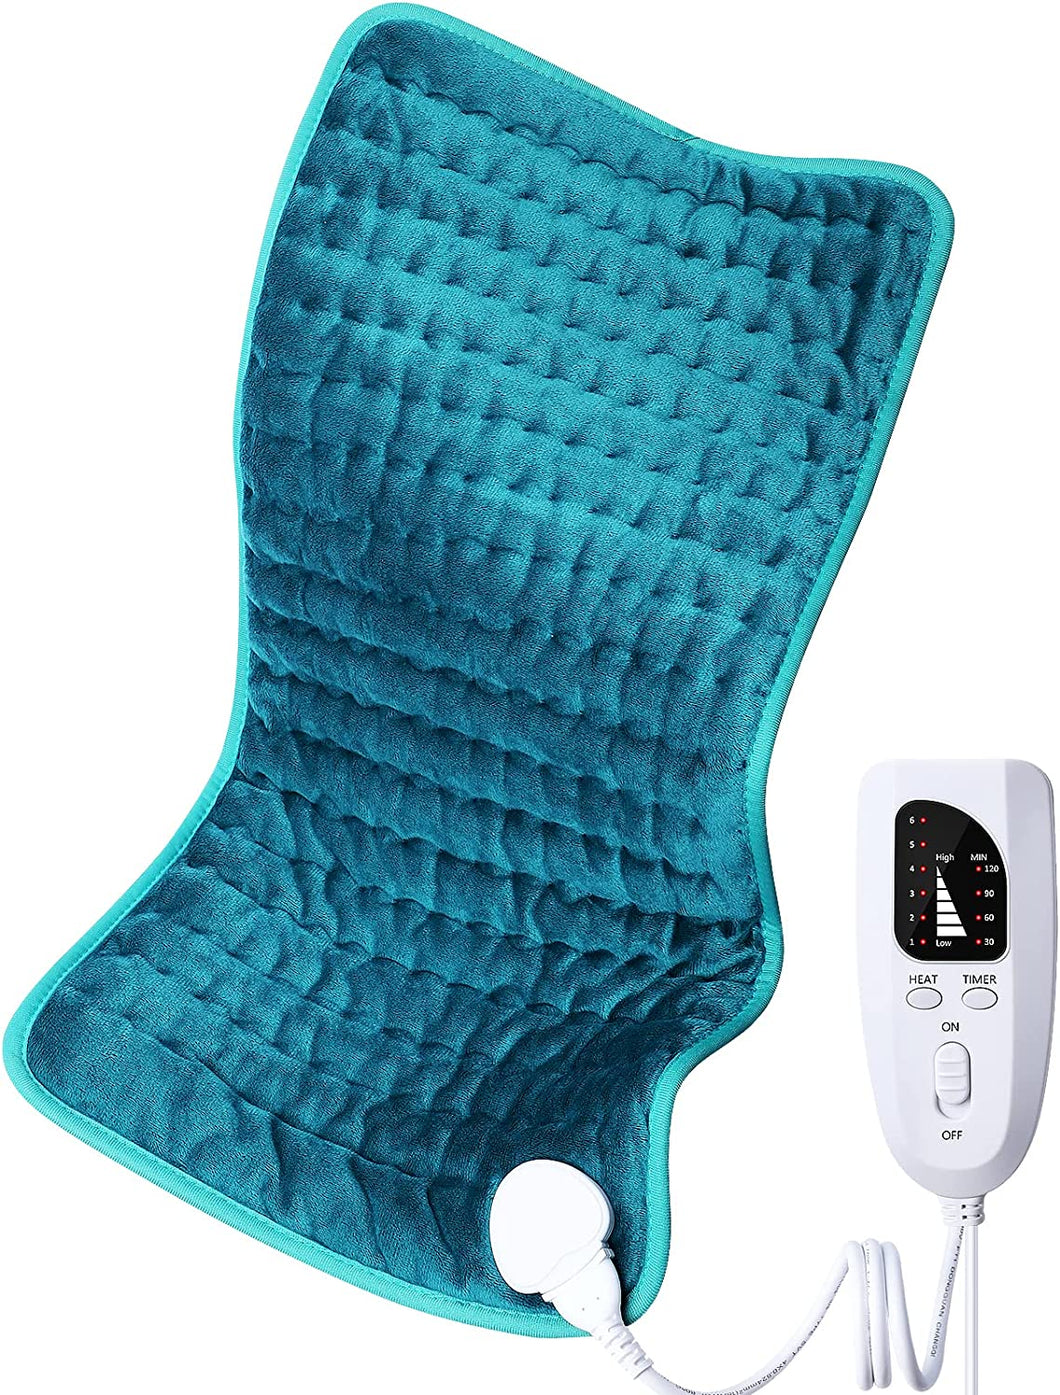 Electric Heating Pad for Back/Shoulder/Neck/Knee/Leg Pain Relief, 6 Fast Heating Settings, Auto-Off, Machine Washable, Moist Dry Heat Options, Extra Large 12